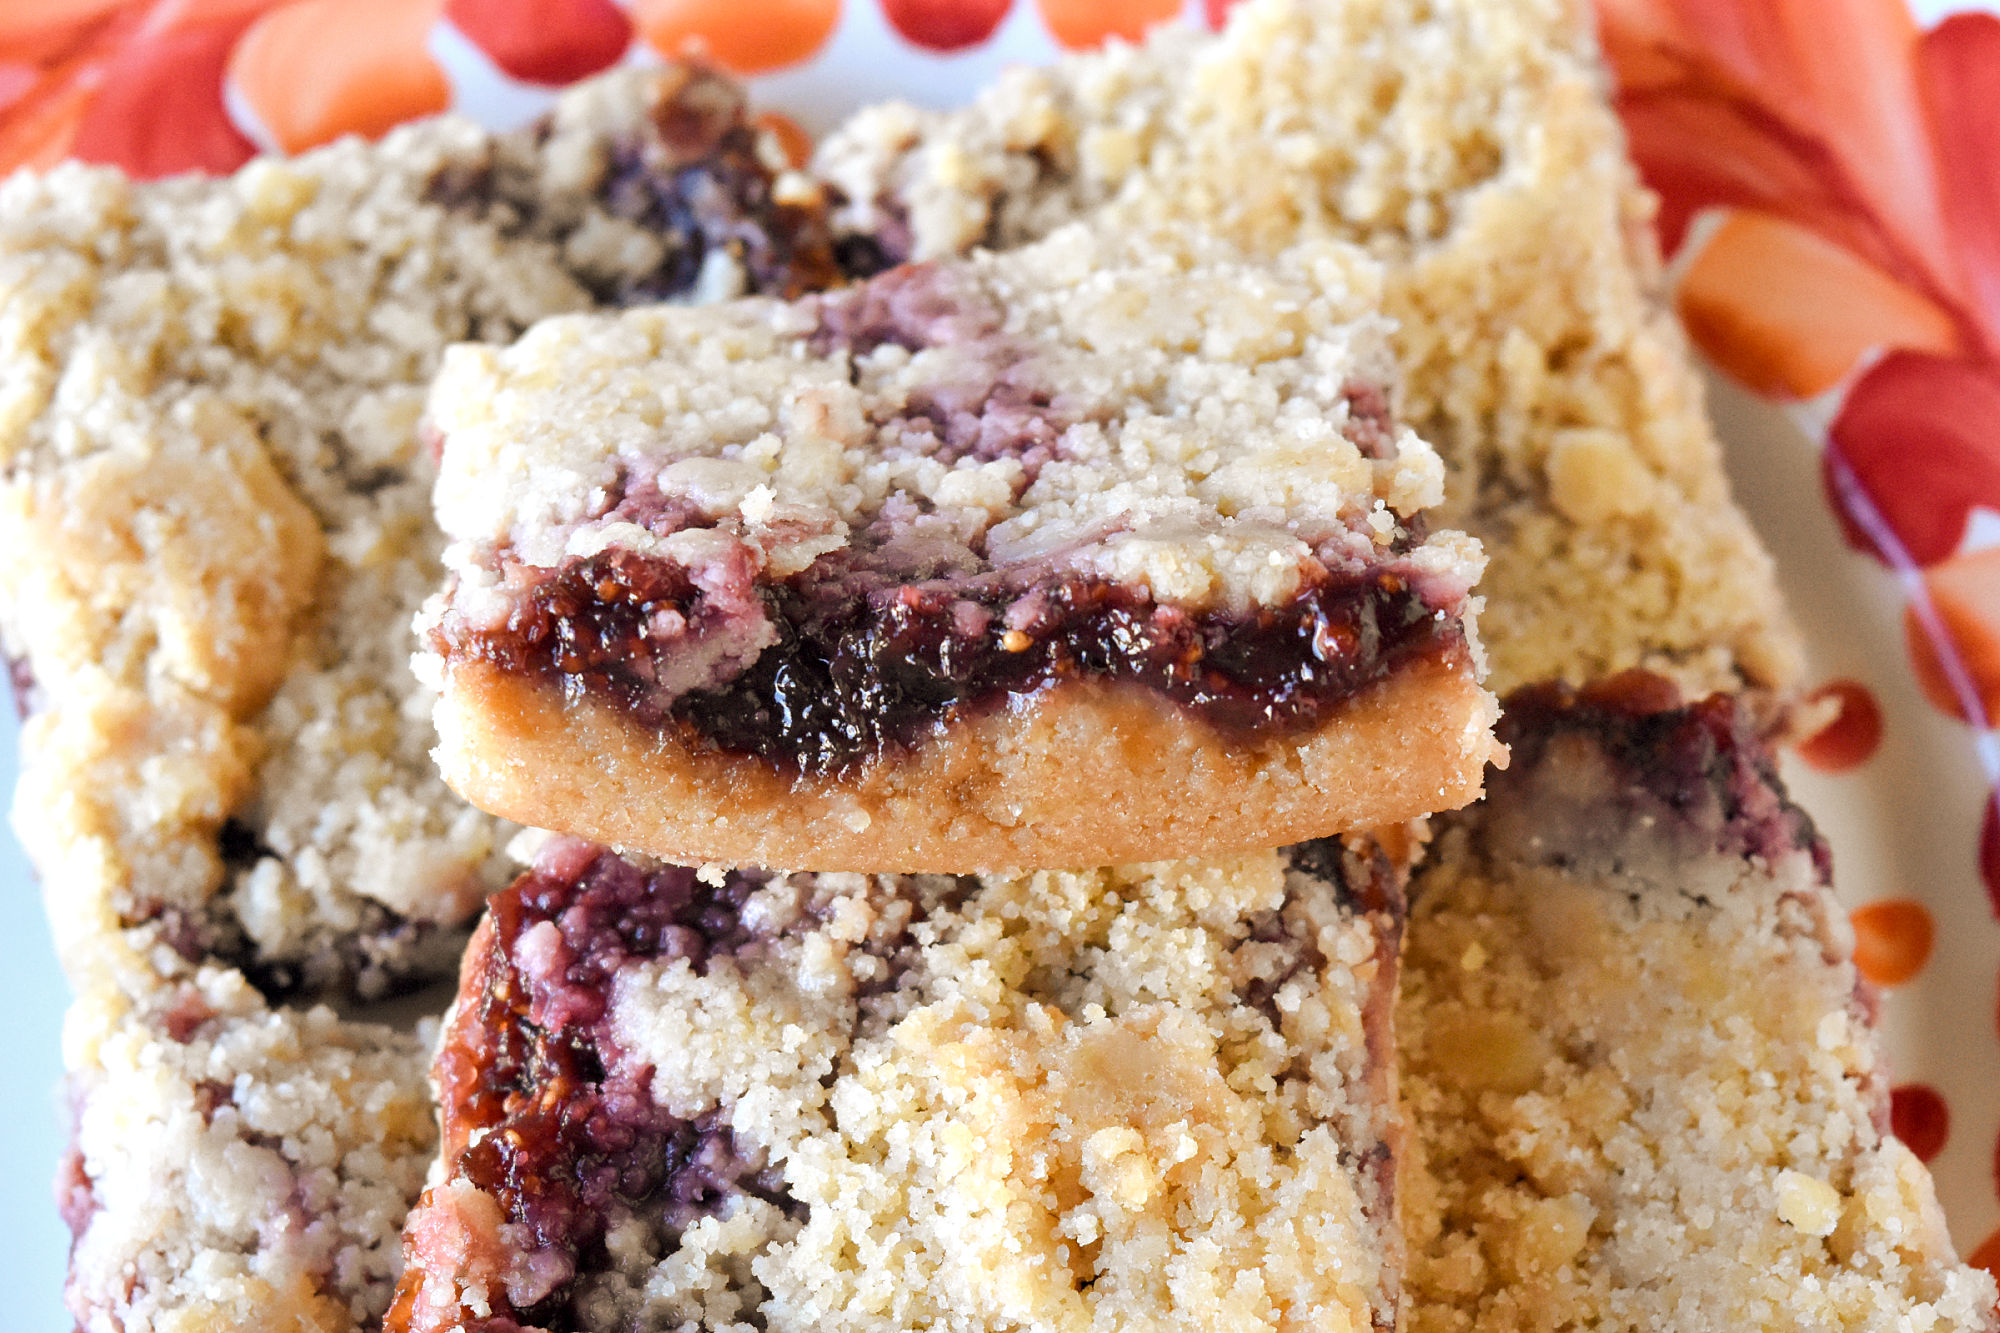 Craving something sweet but tired of the same old options? These Fig Preserve Shortbread Bars are a twist on a classic treat that will satisfy your sugar craving. #SpringSweetsWeek #FigPreserveBars #SweetTreats #ButteryBites #HomemadeGoodness #BakedWithLove
